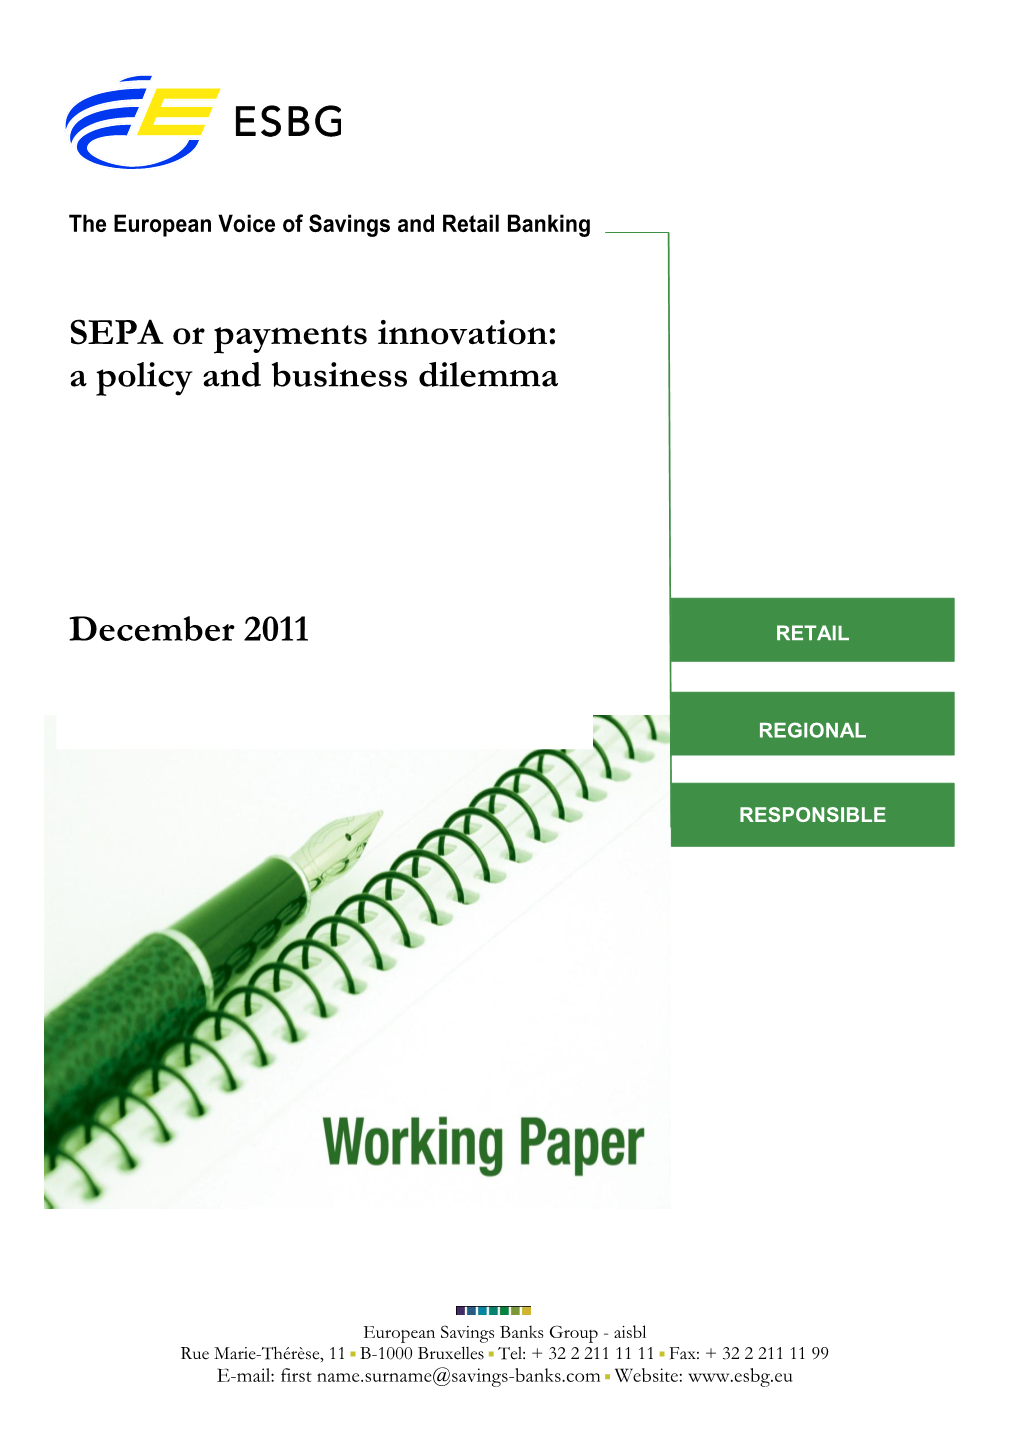 SEPA Or Payments Innovation: a Policy and Business Dilemma